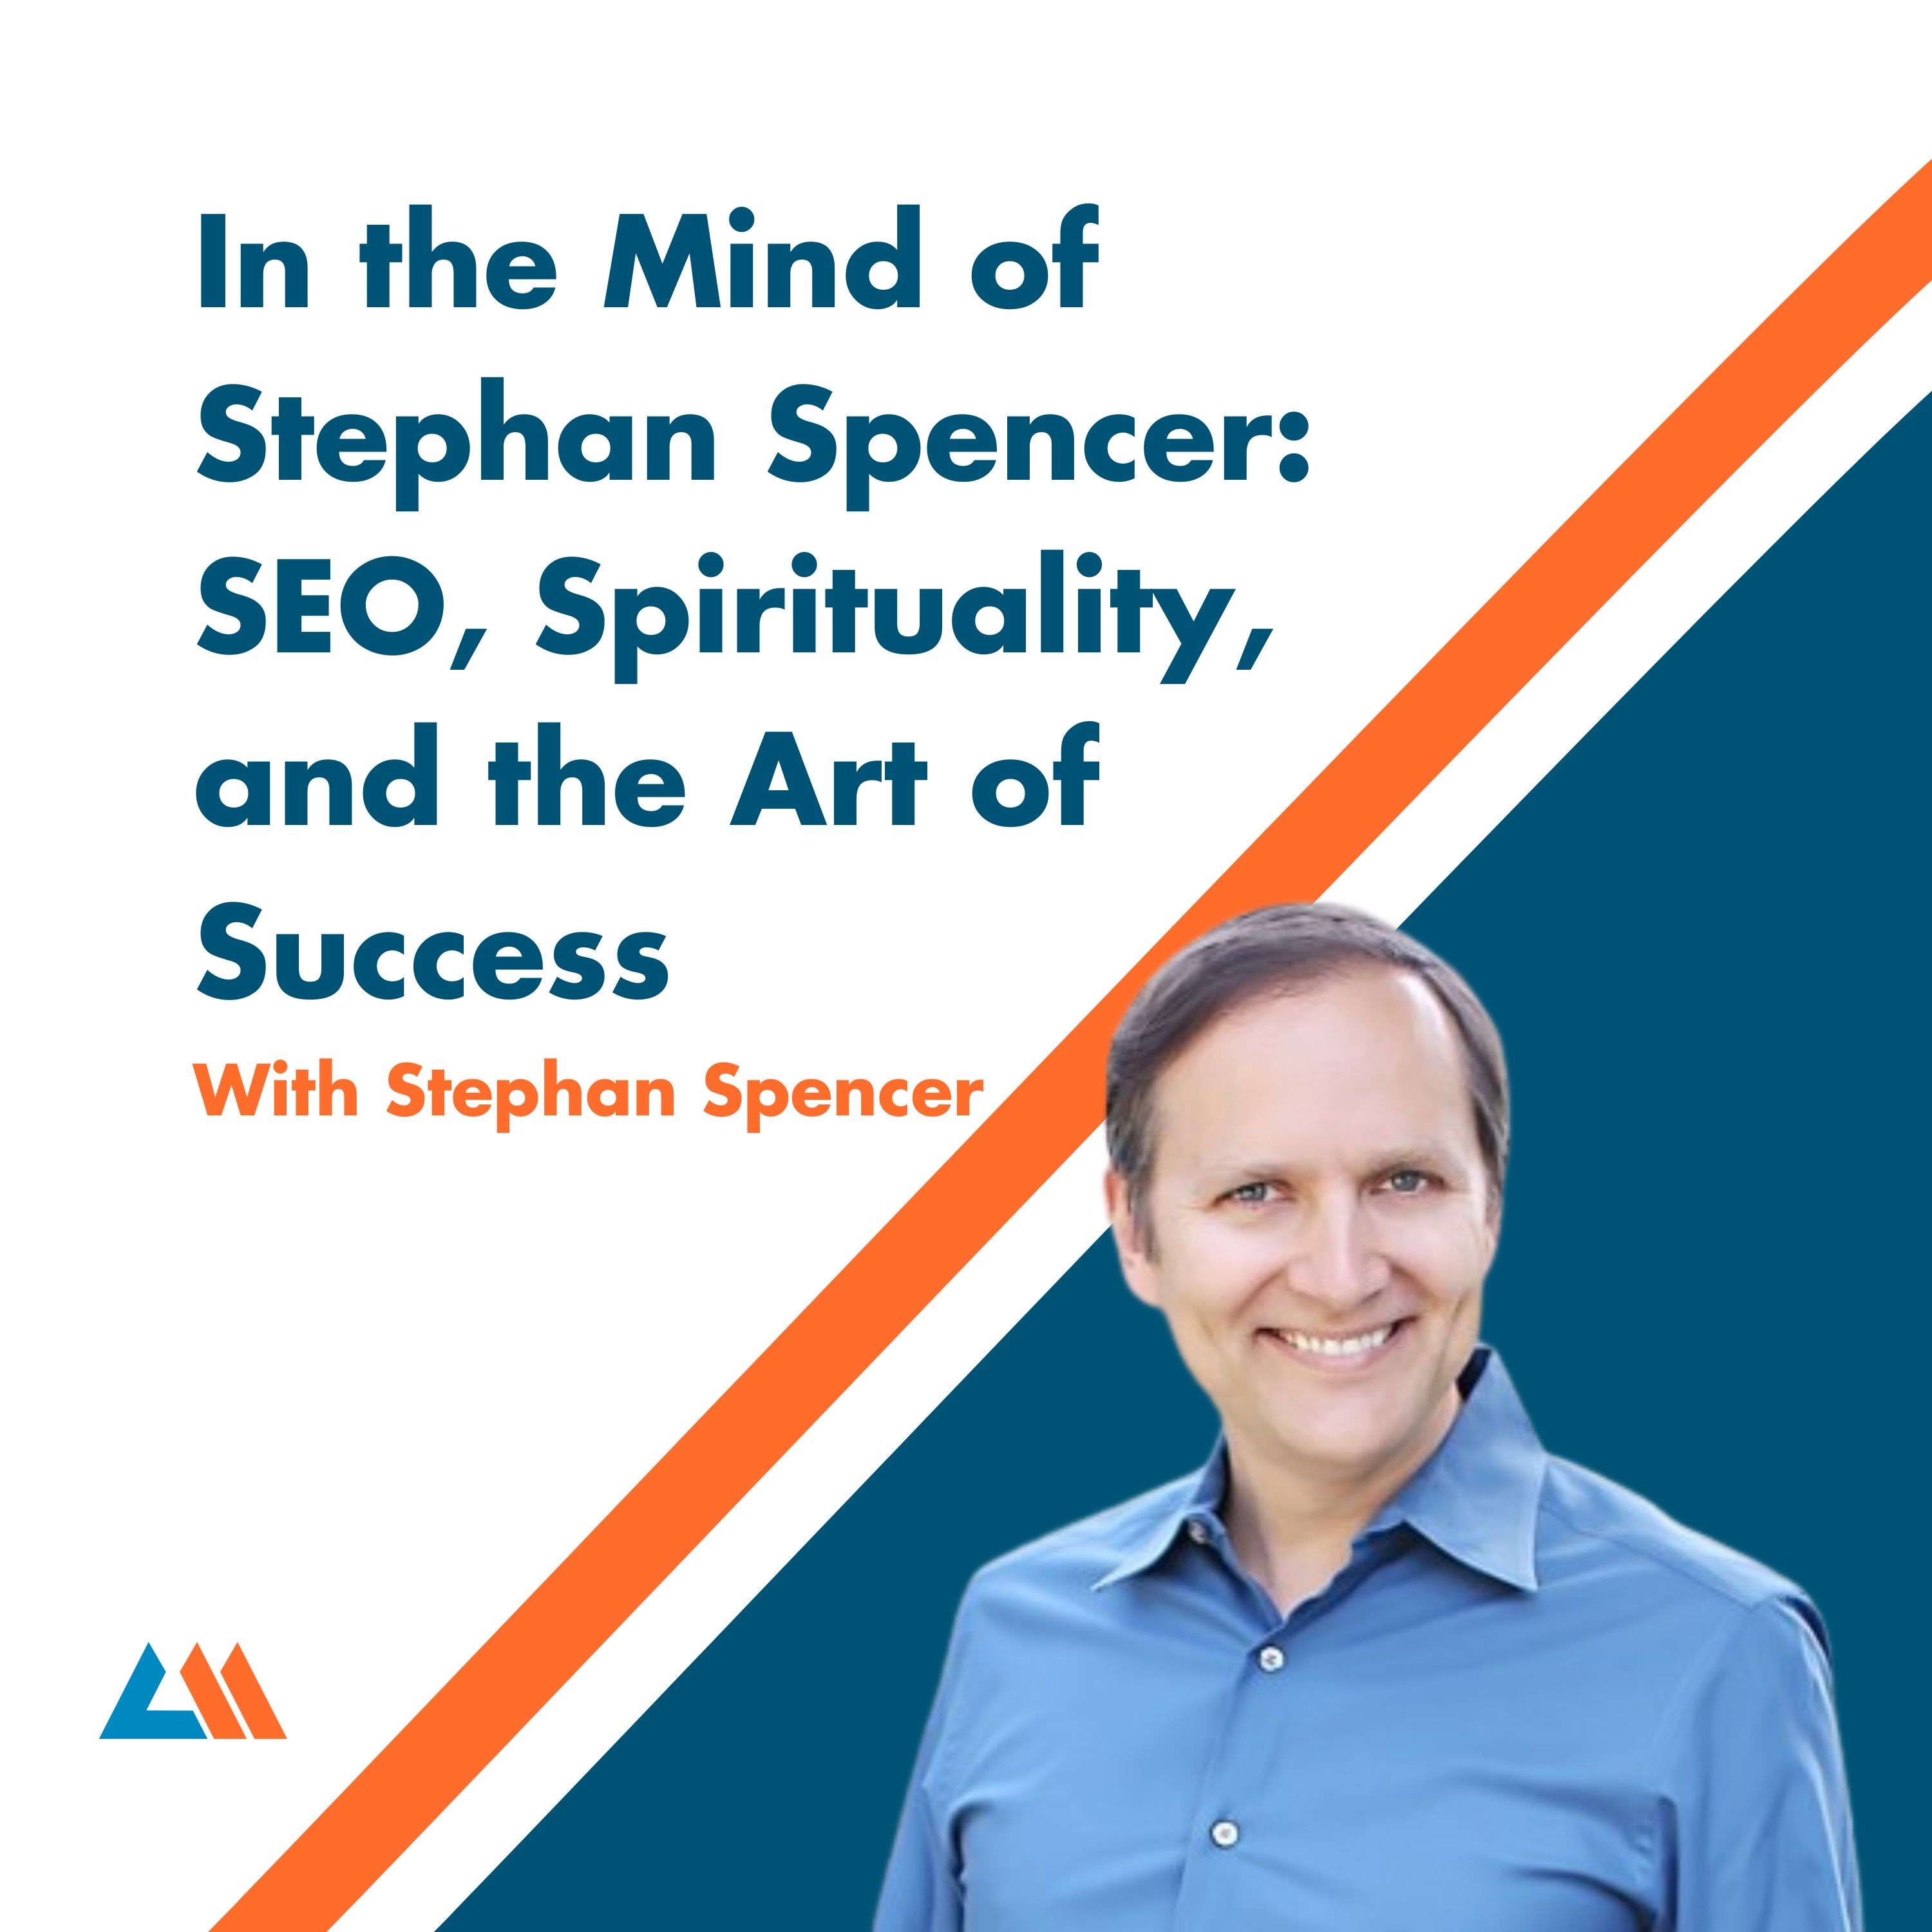 Balancing Spirituality and Business: Stephan Spencer on SEO and the Art of Success